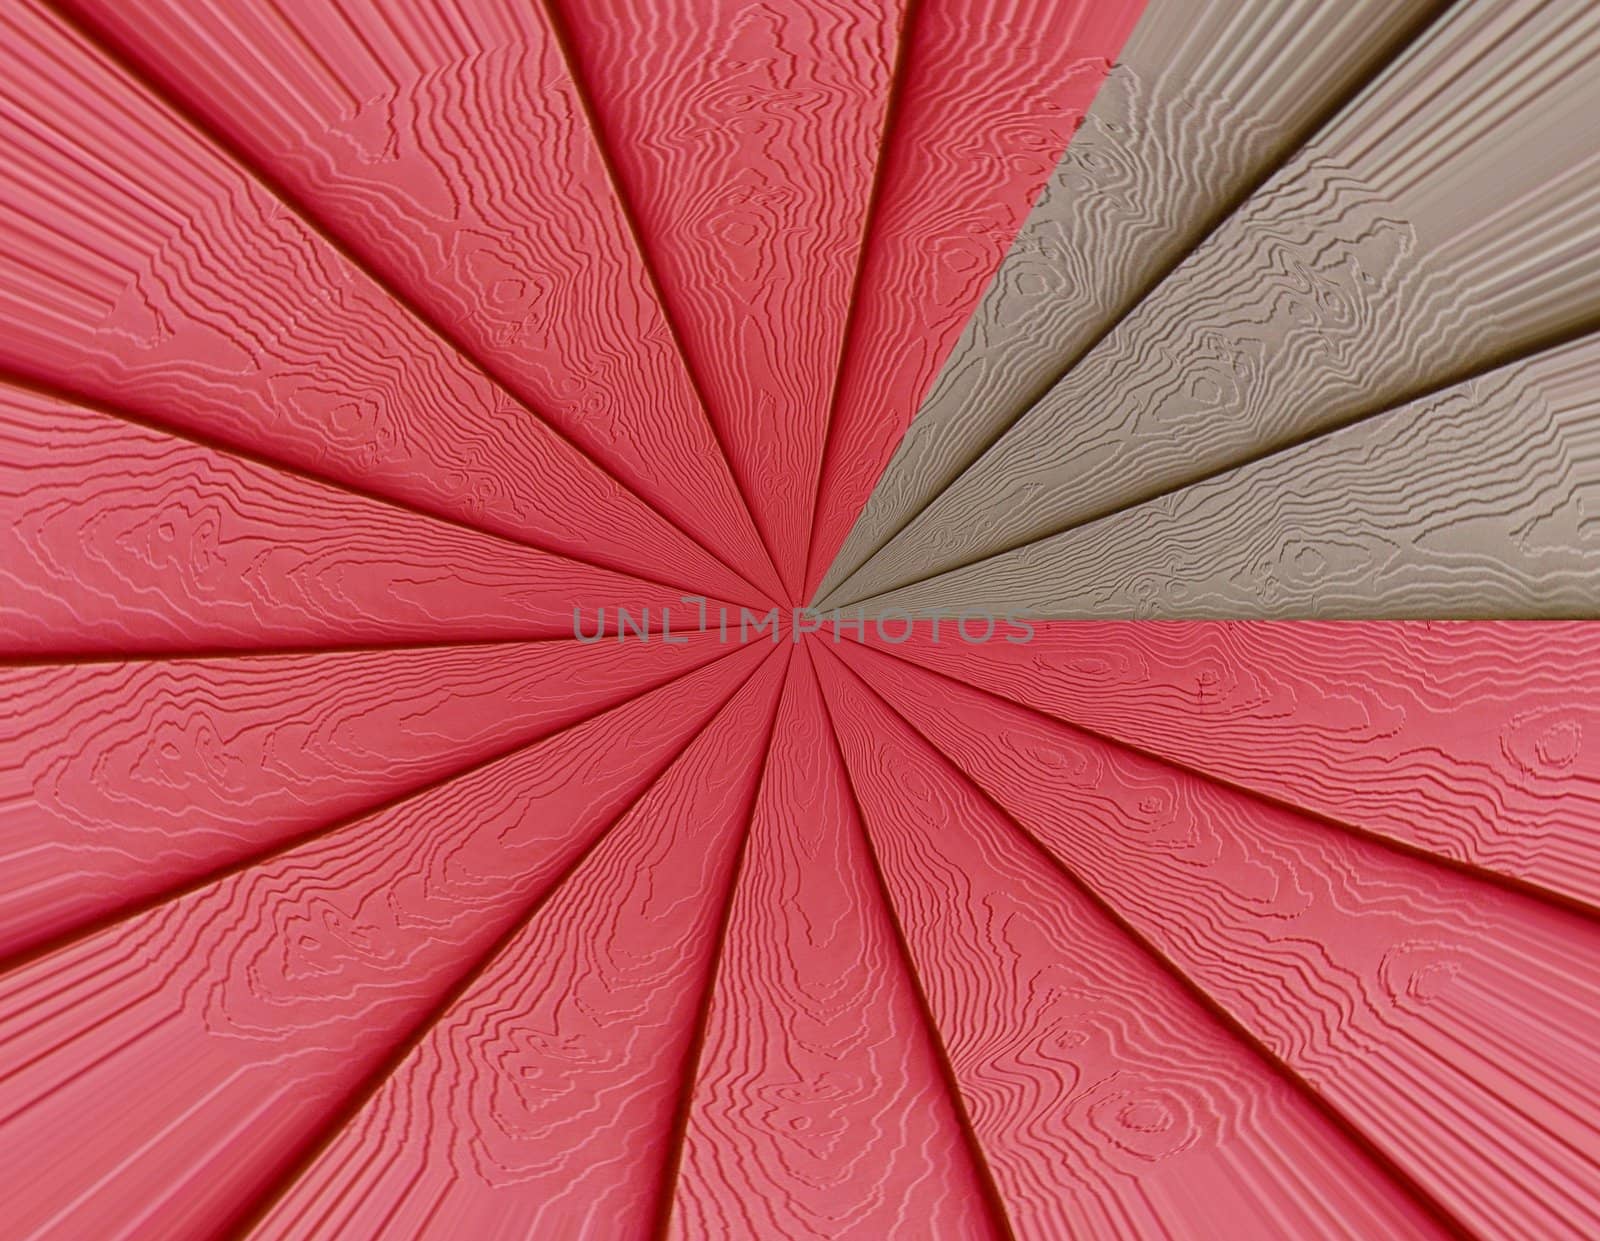 colorful wooden twirl background